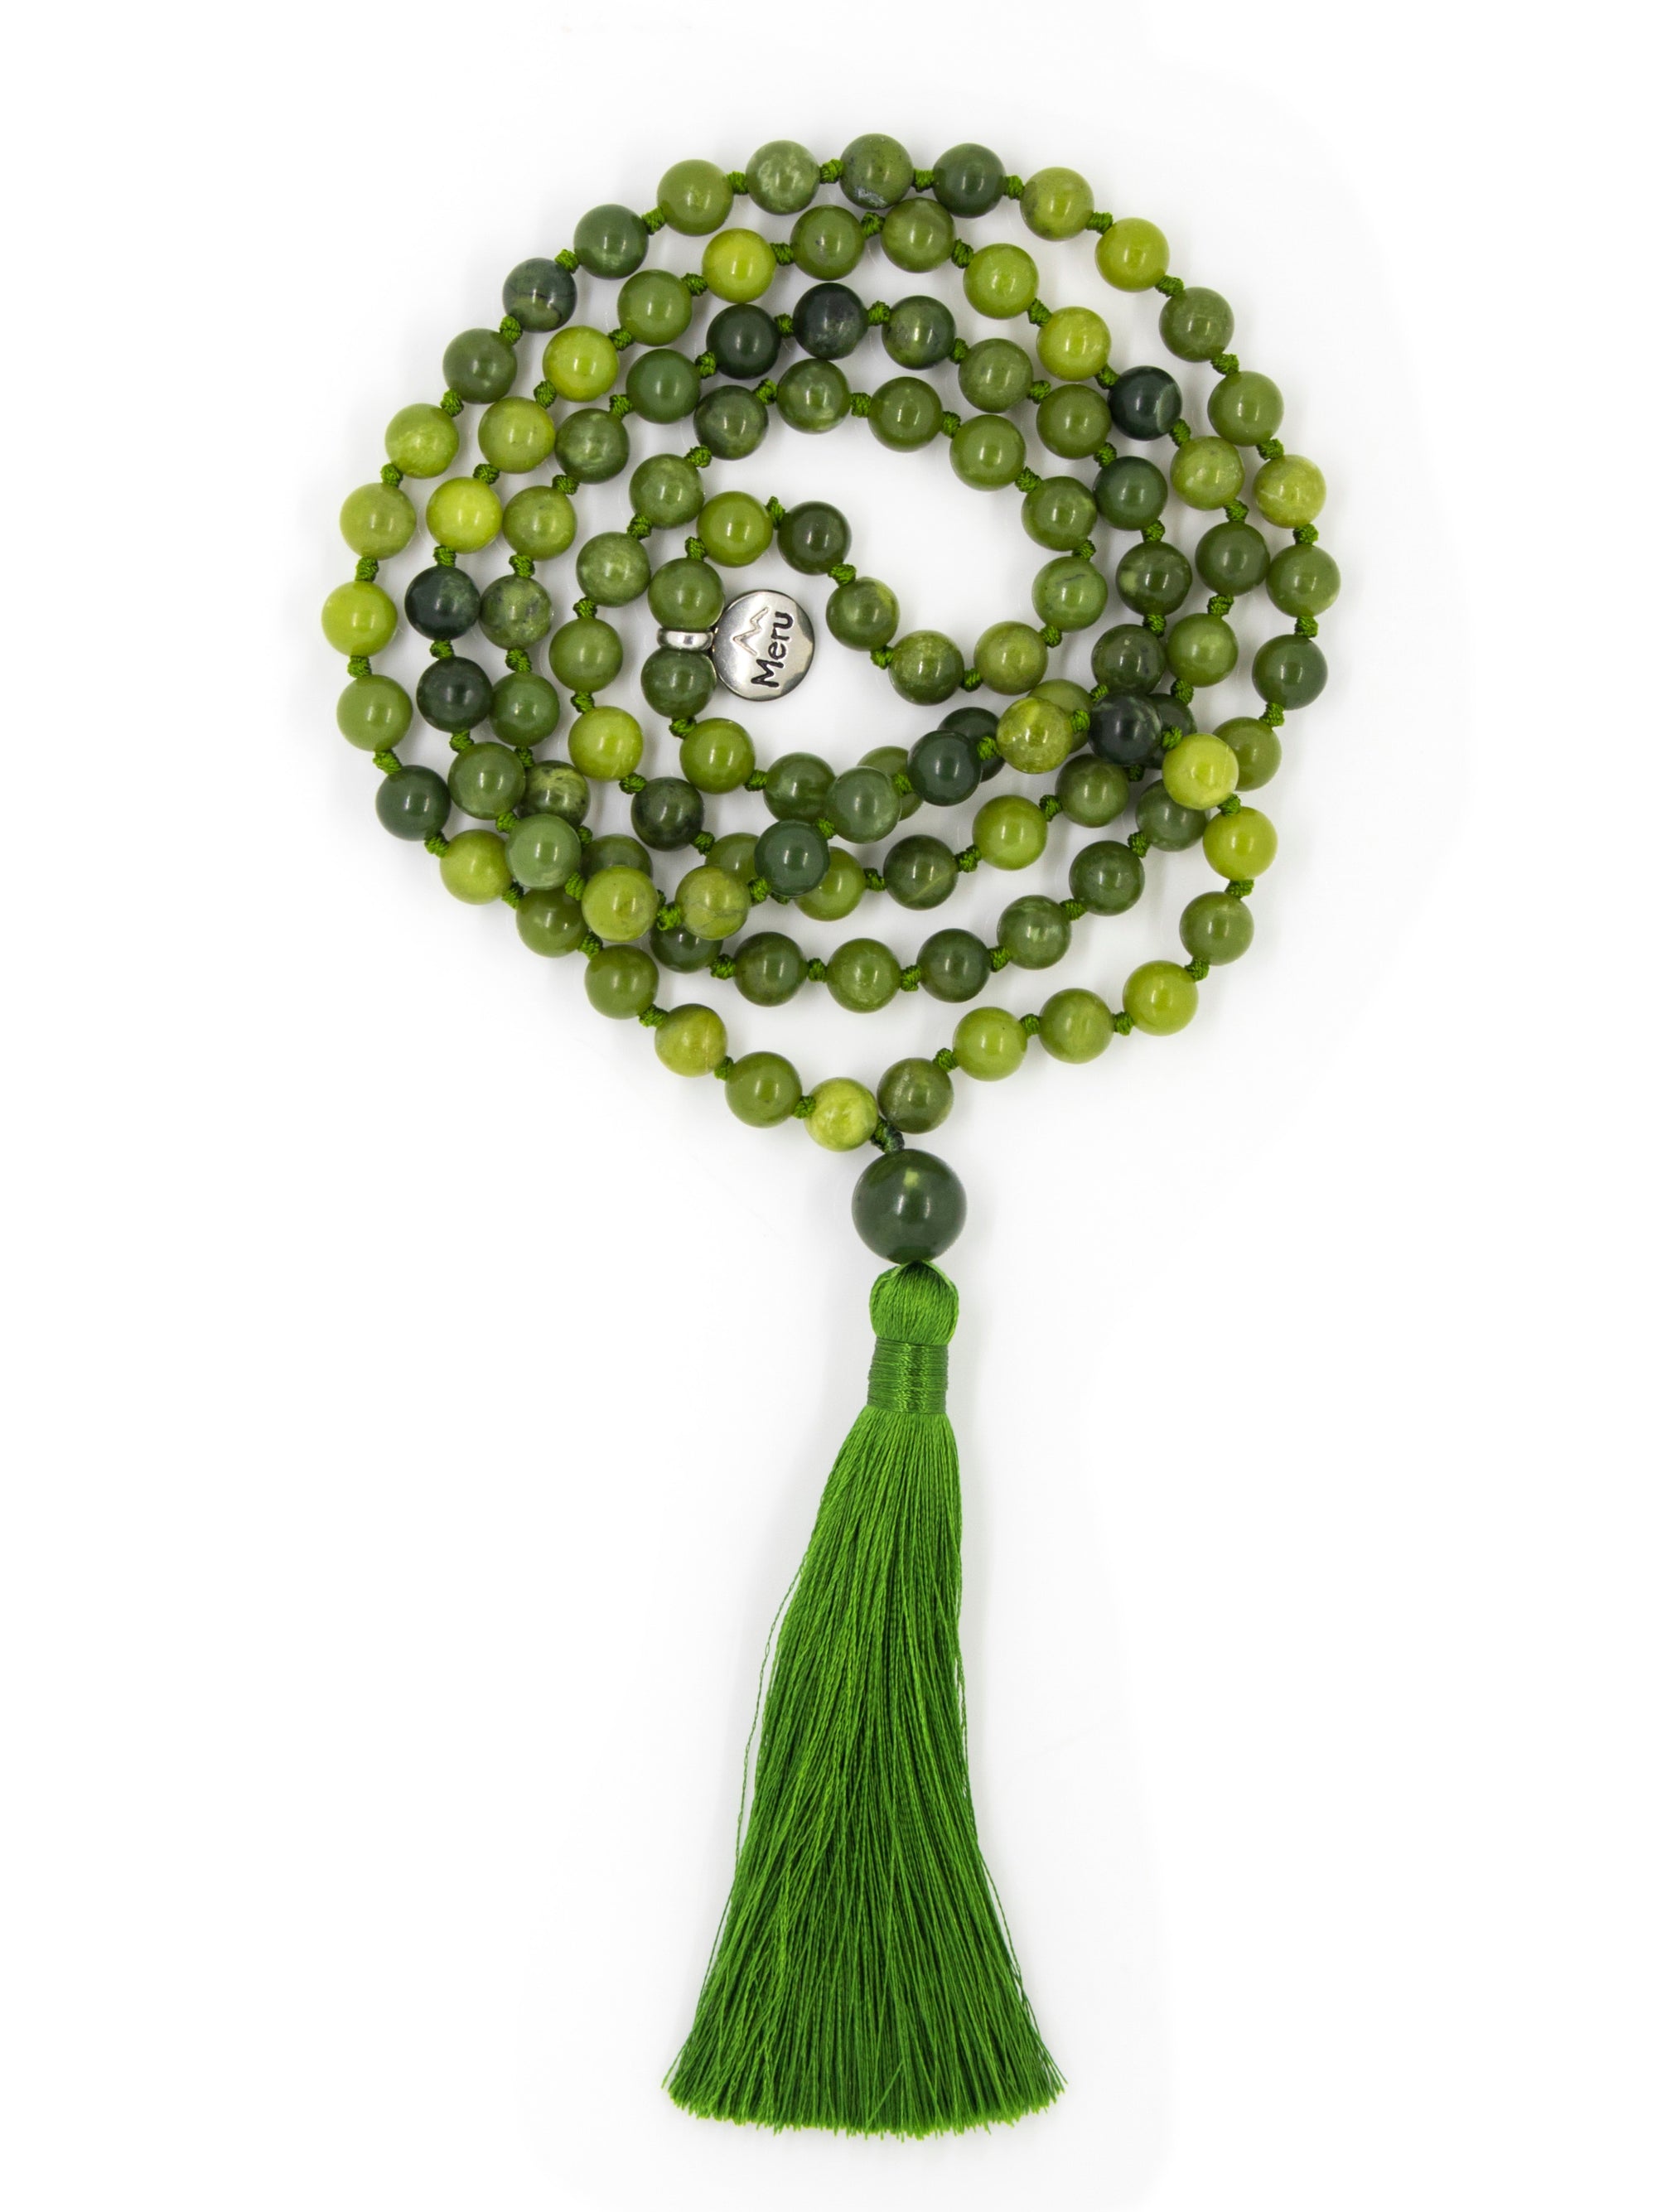 What Are Mala Beads